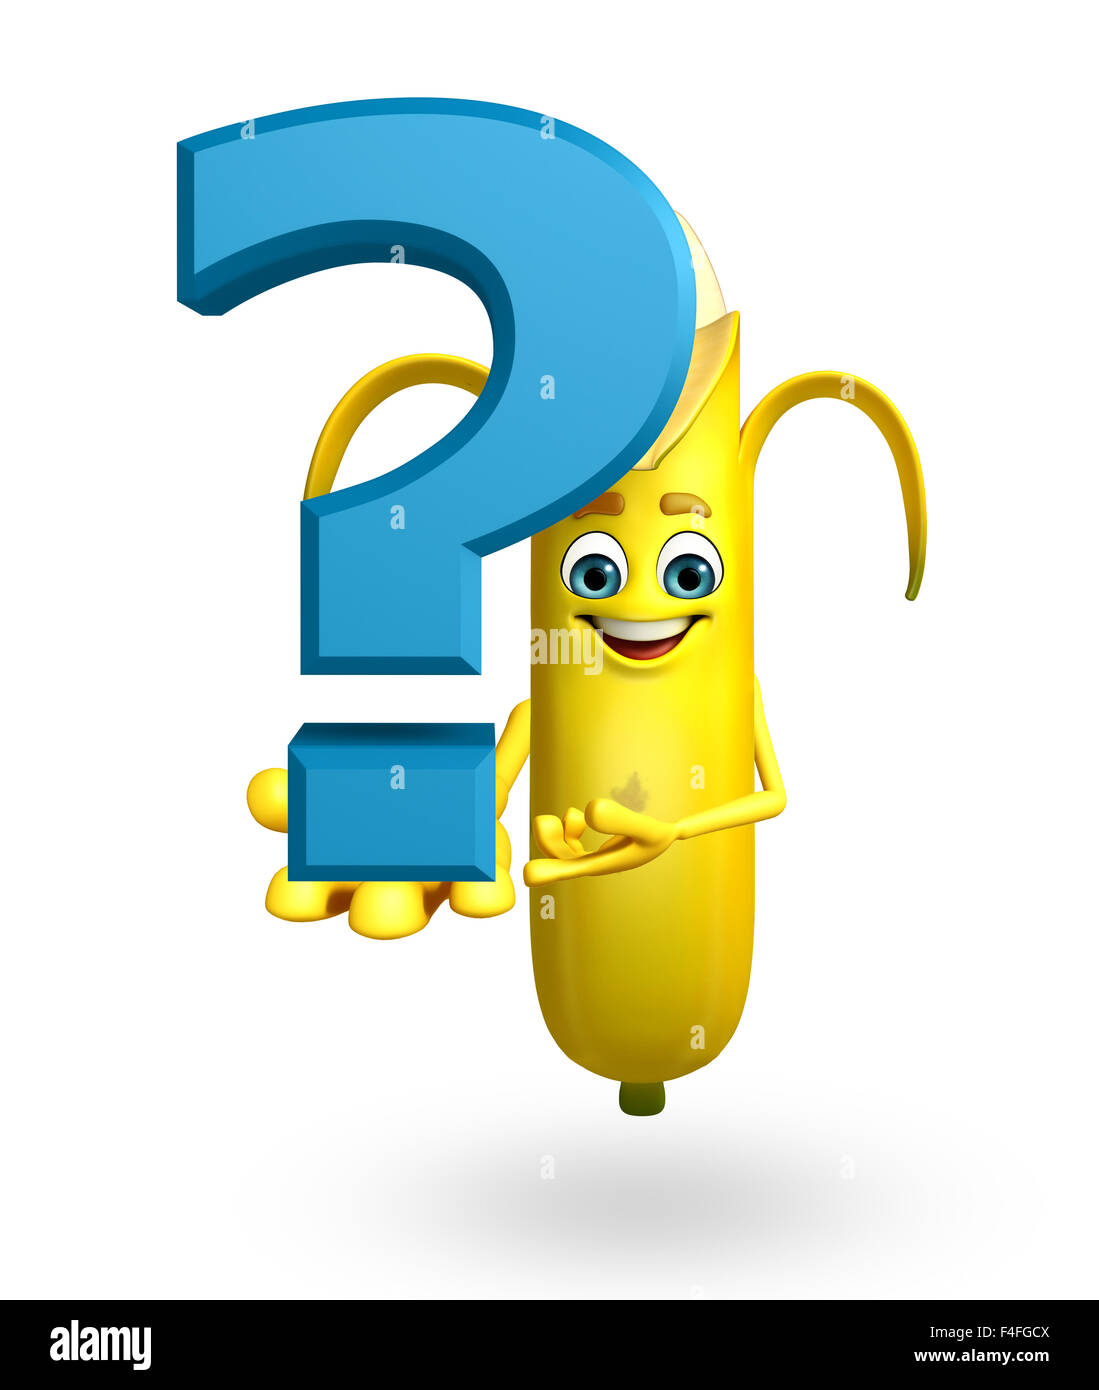 3d-rendered-illustration-of-cartoon-character-of-banana-with-question-F4FGCX.jpg